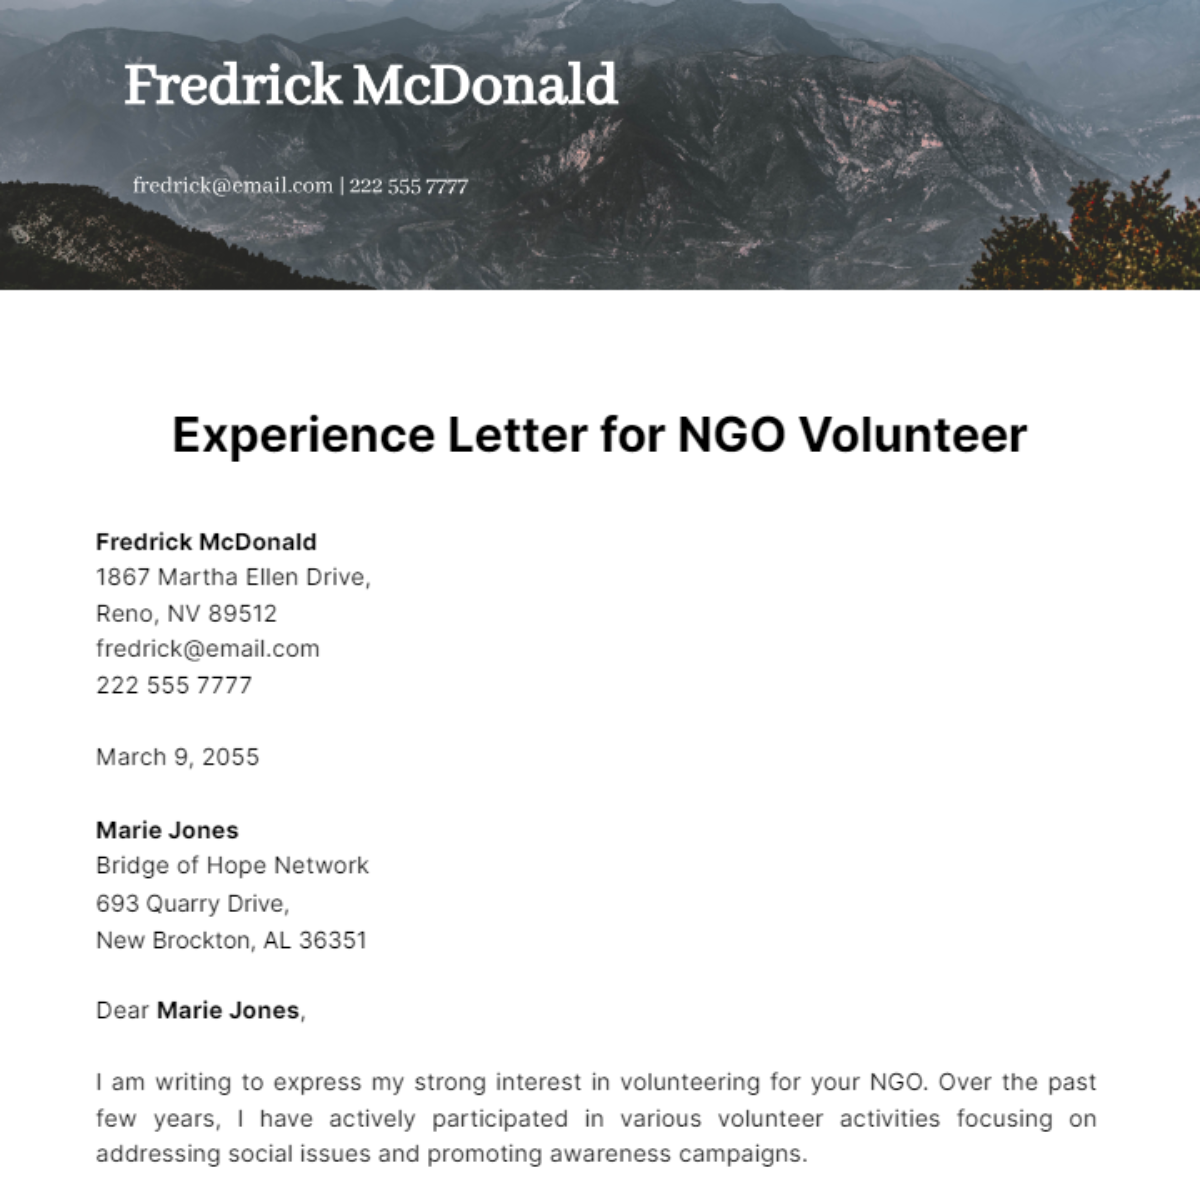 Experience Letter for NGO Volunteer Template